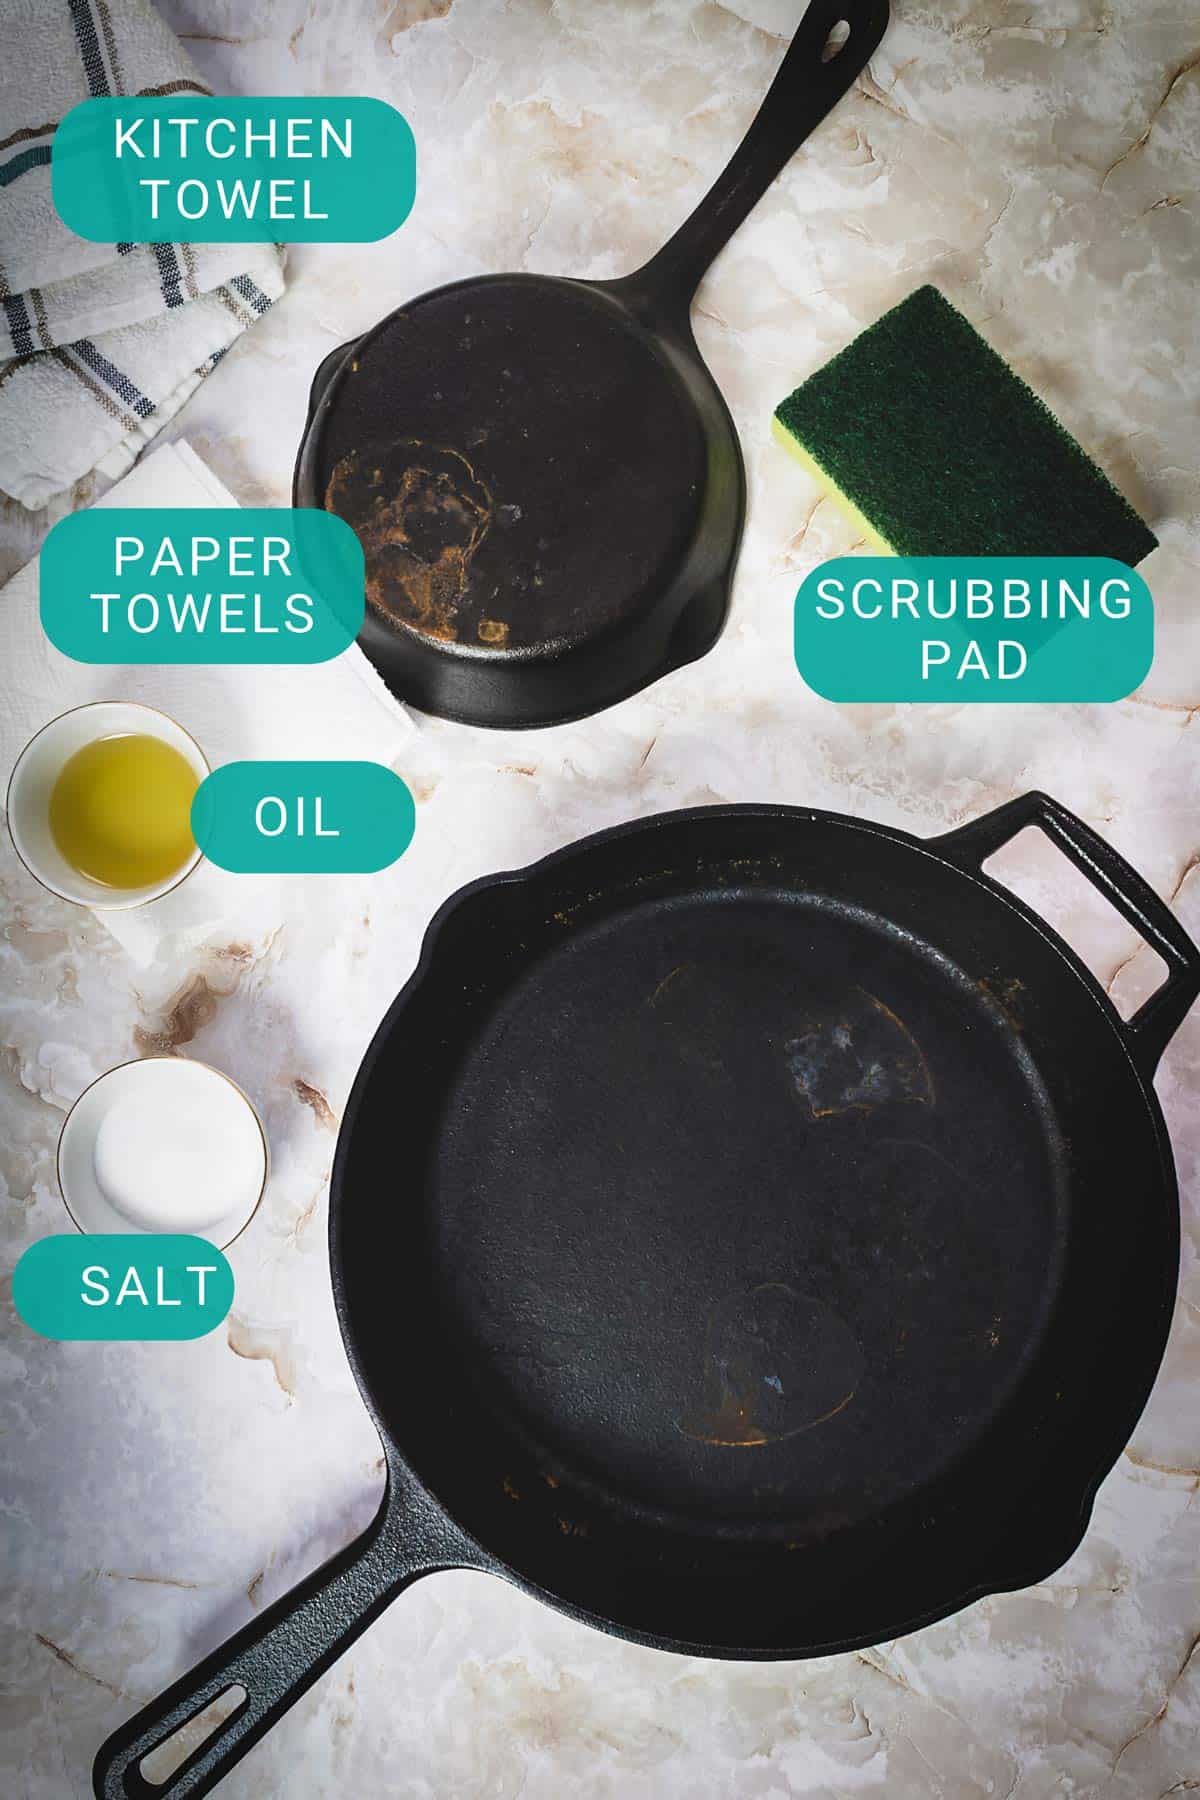 Cast iron pans with cleaning supply.